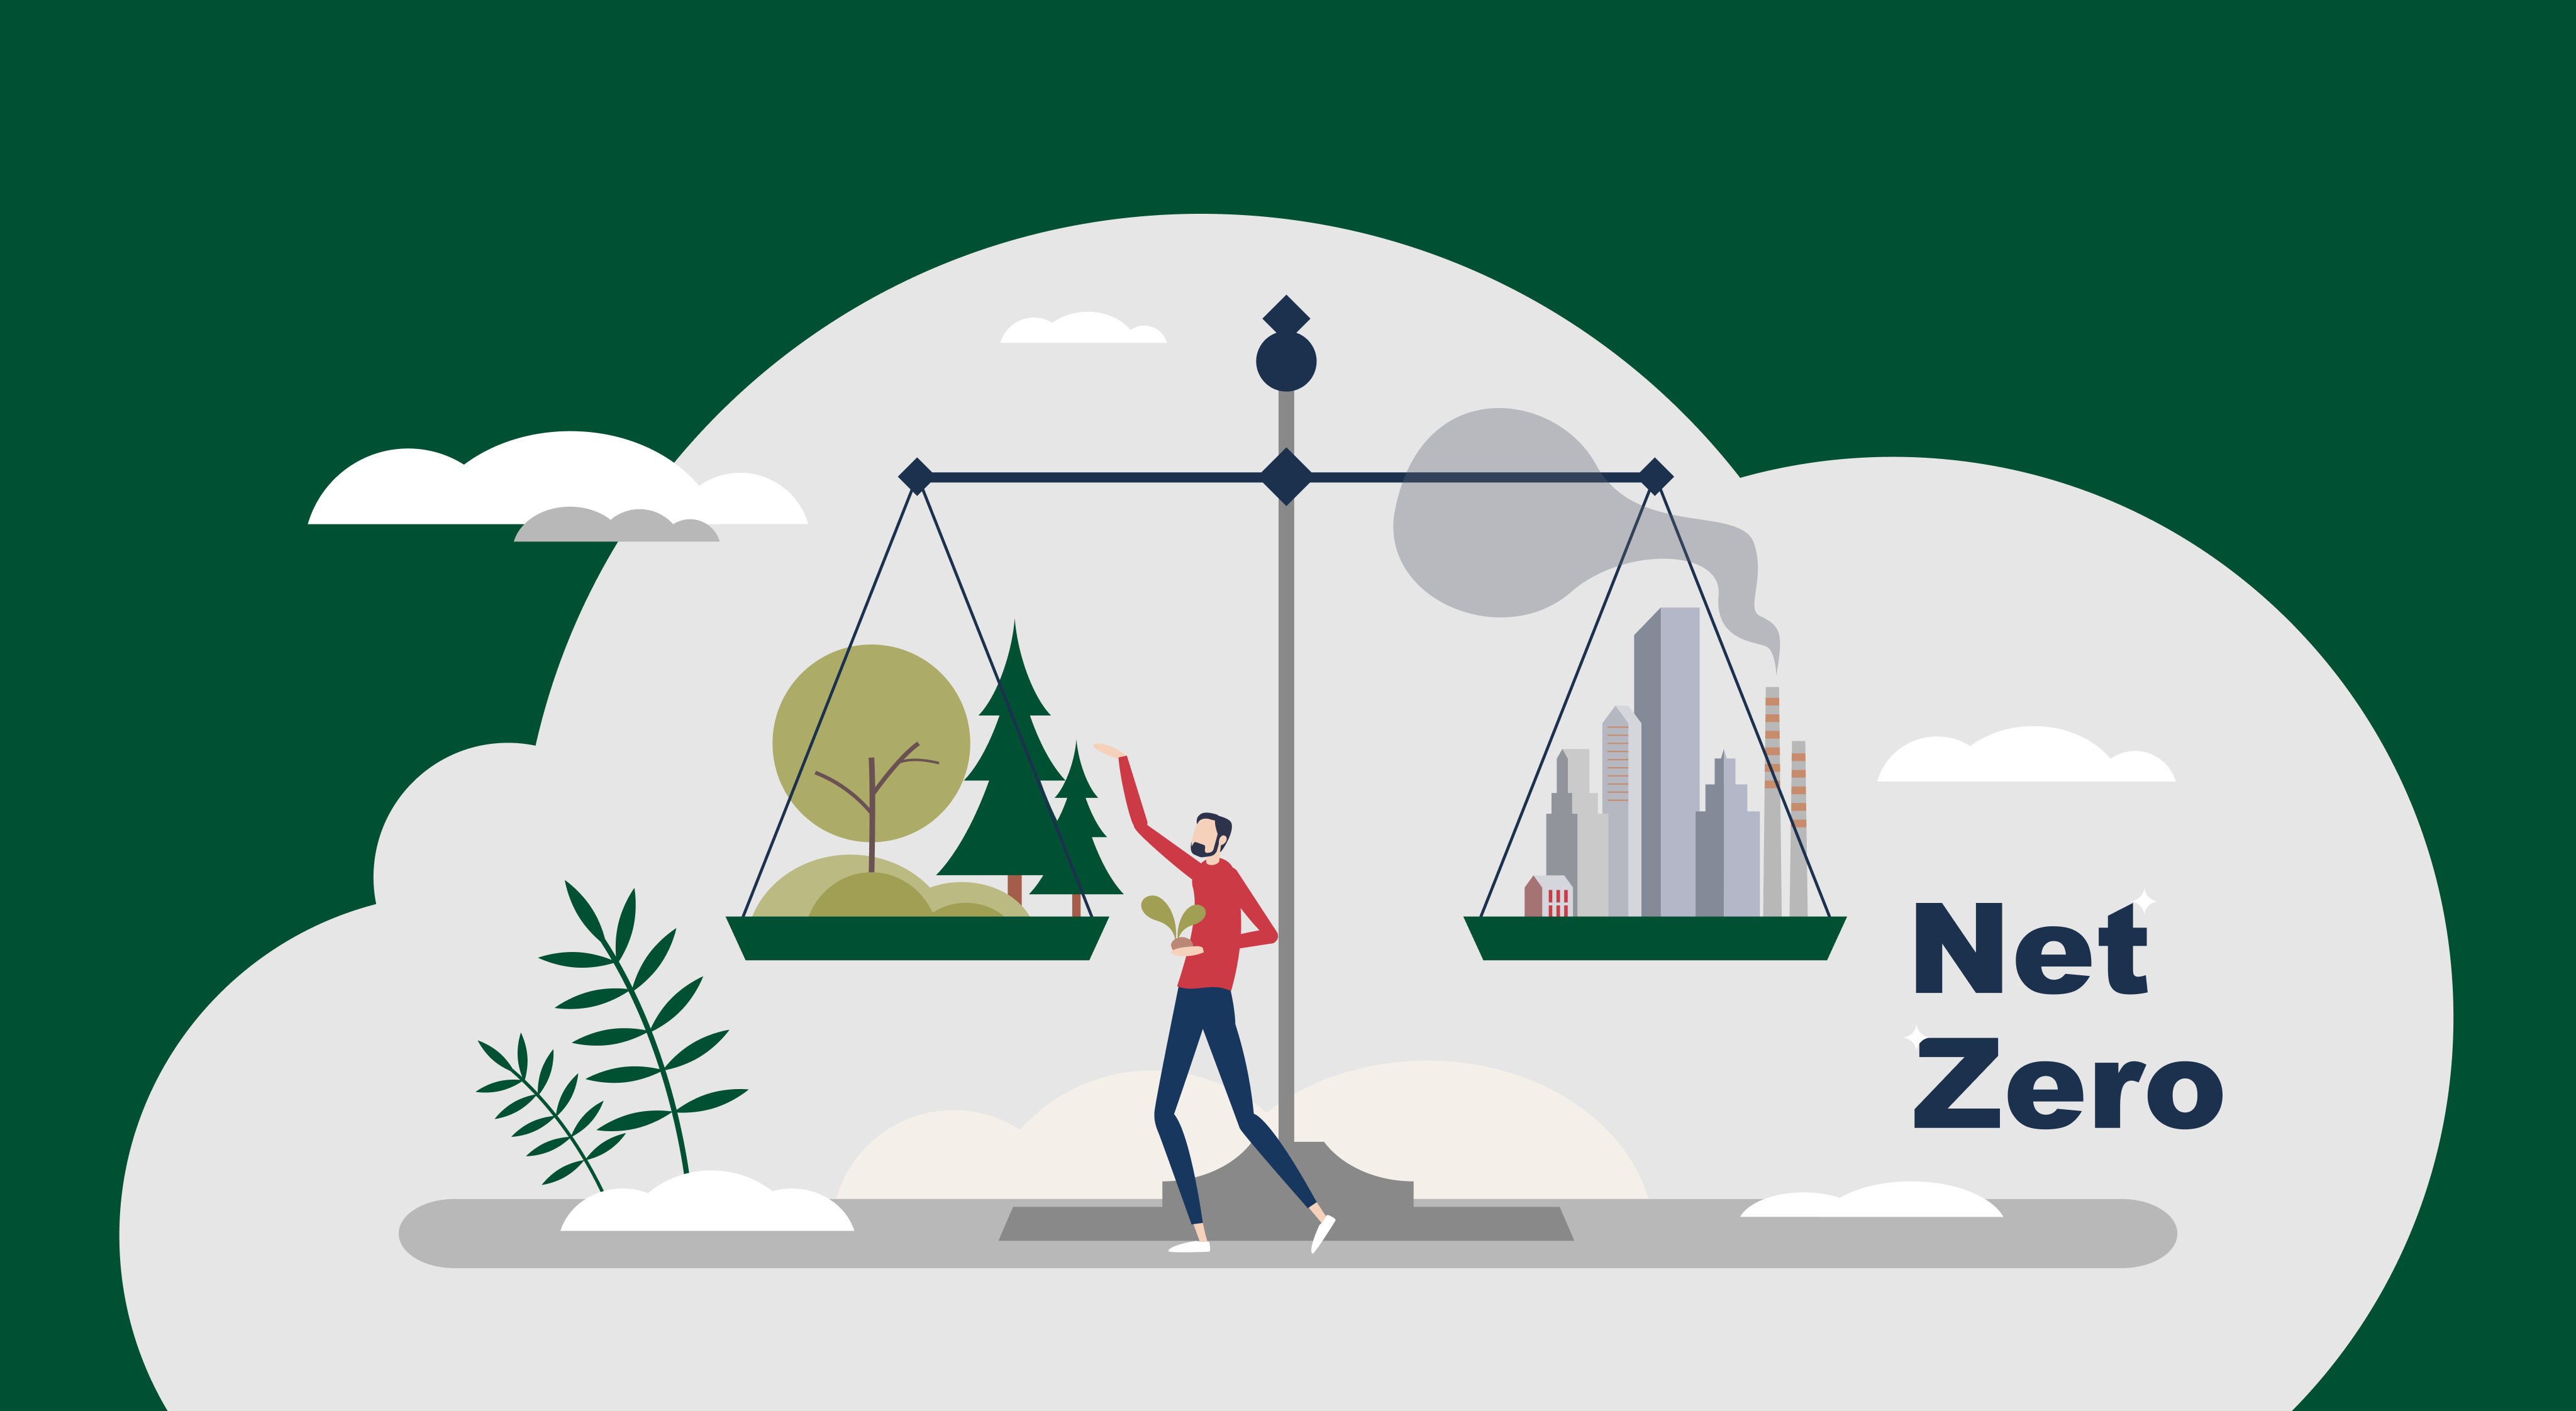 Net Zero – How to develop strategies using sustainability reporting standards